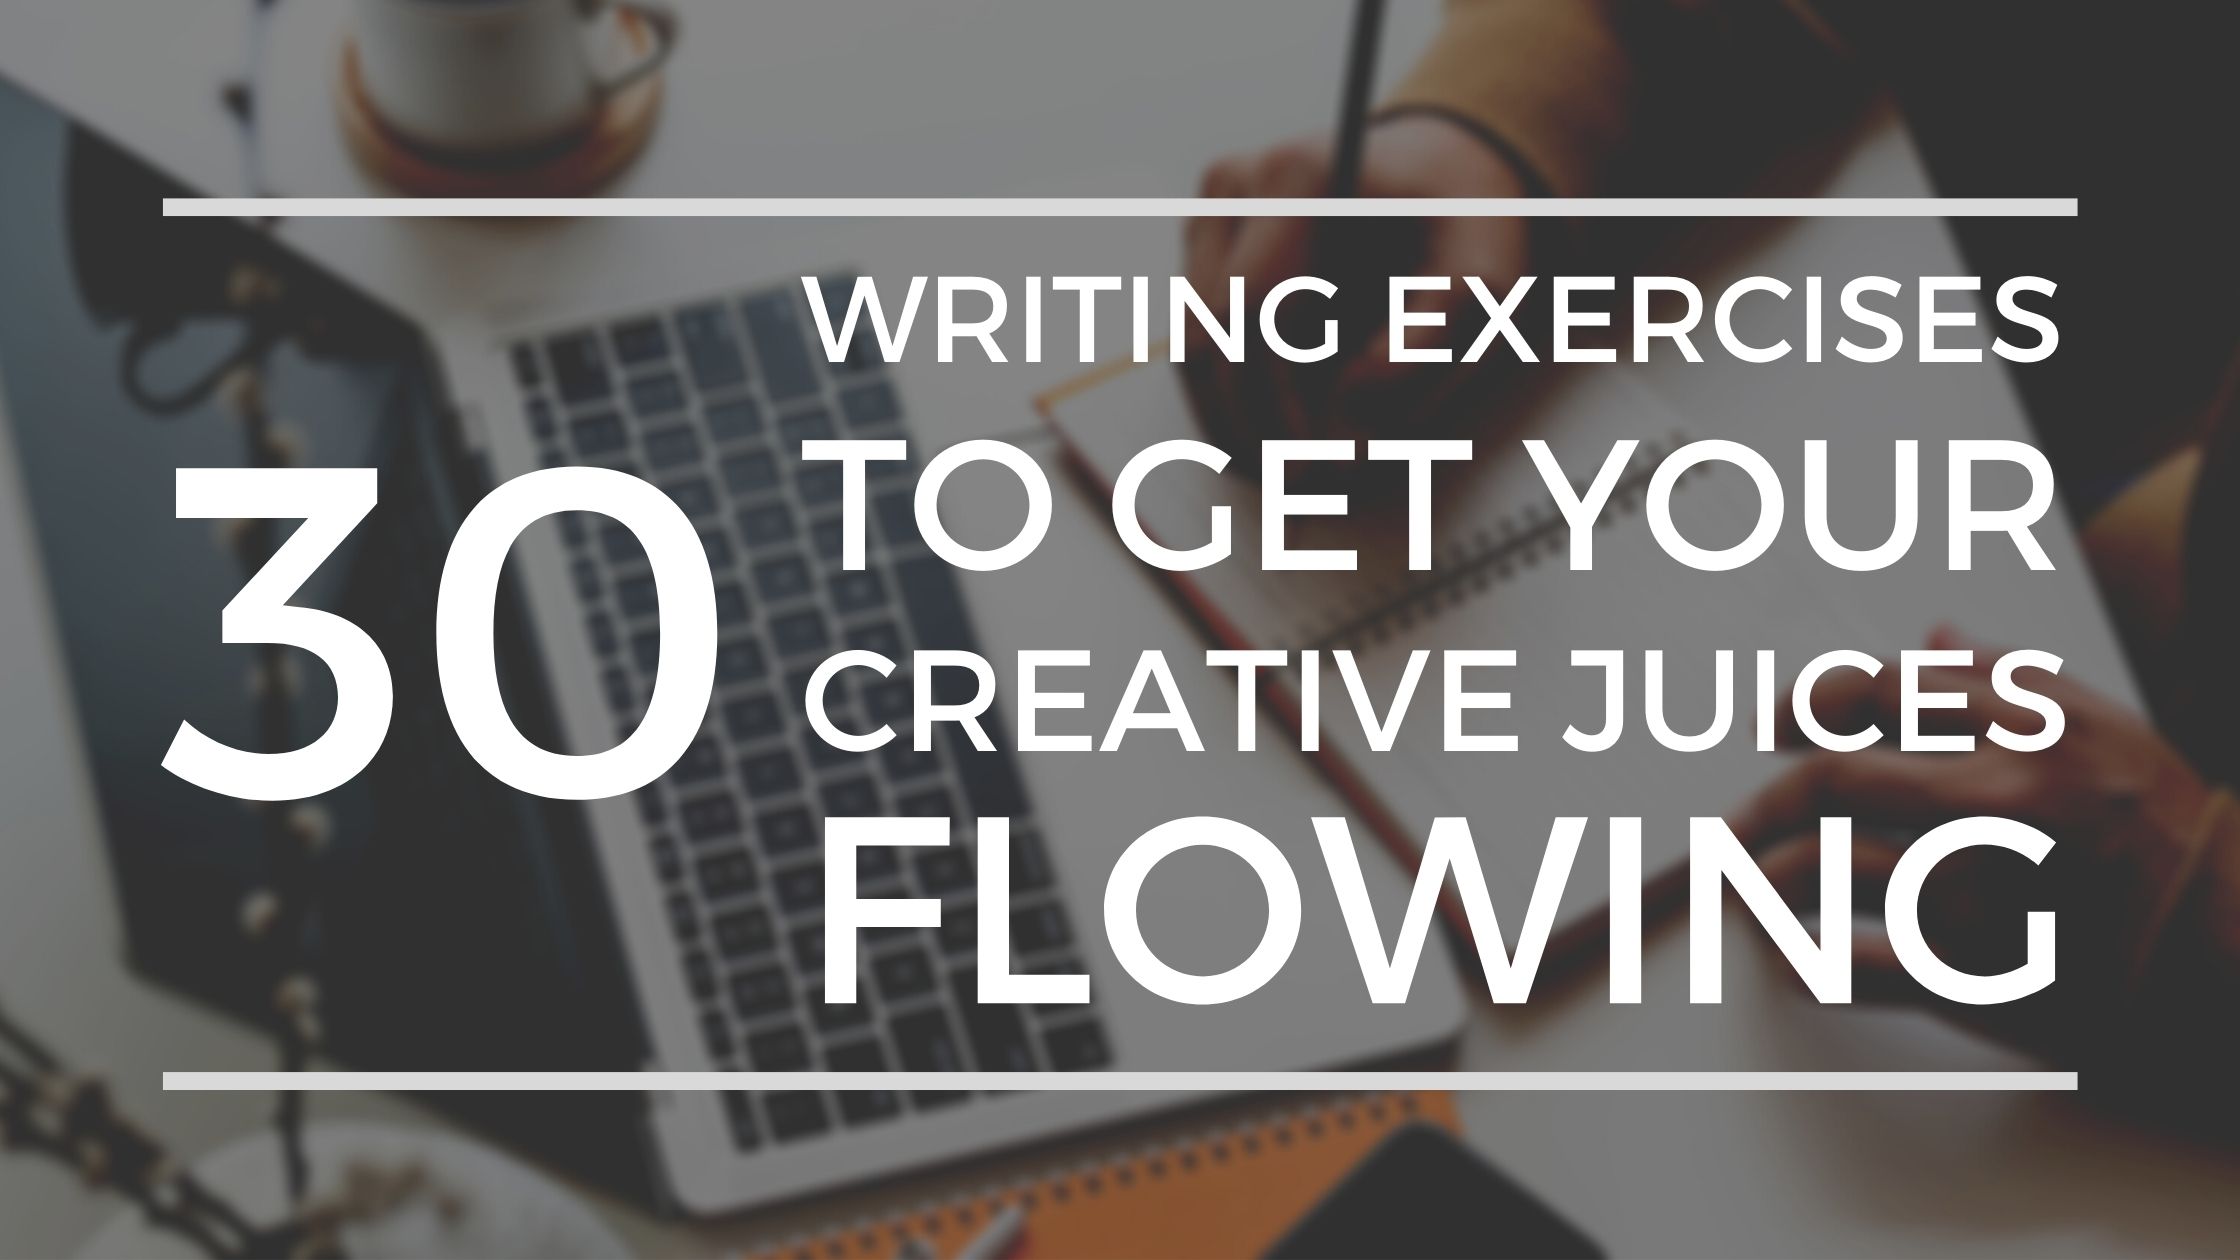 30 Writing Exercises To Get Your Creative Juices Flowing